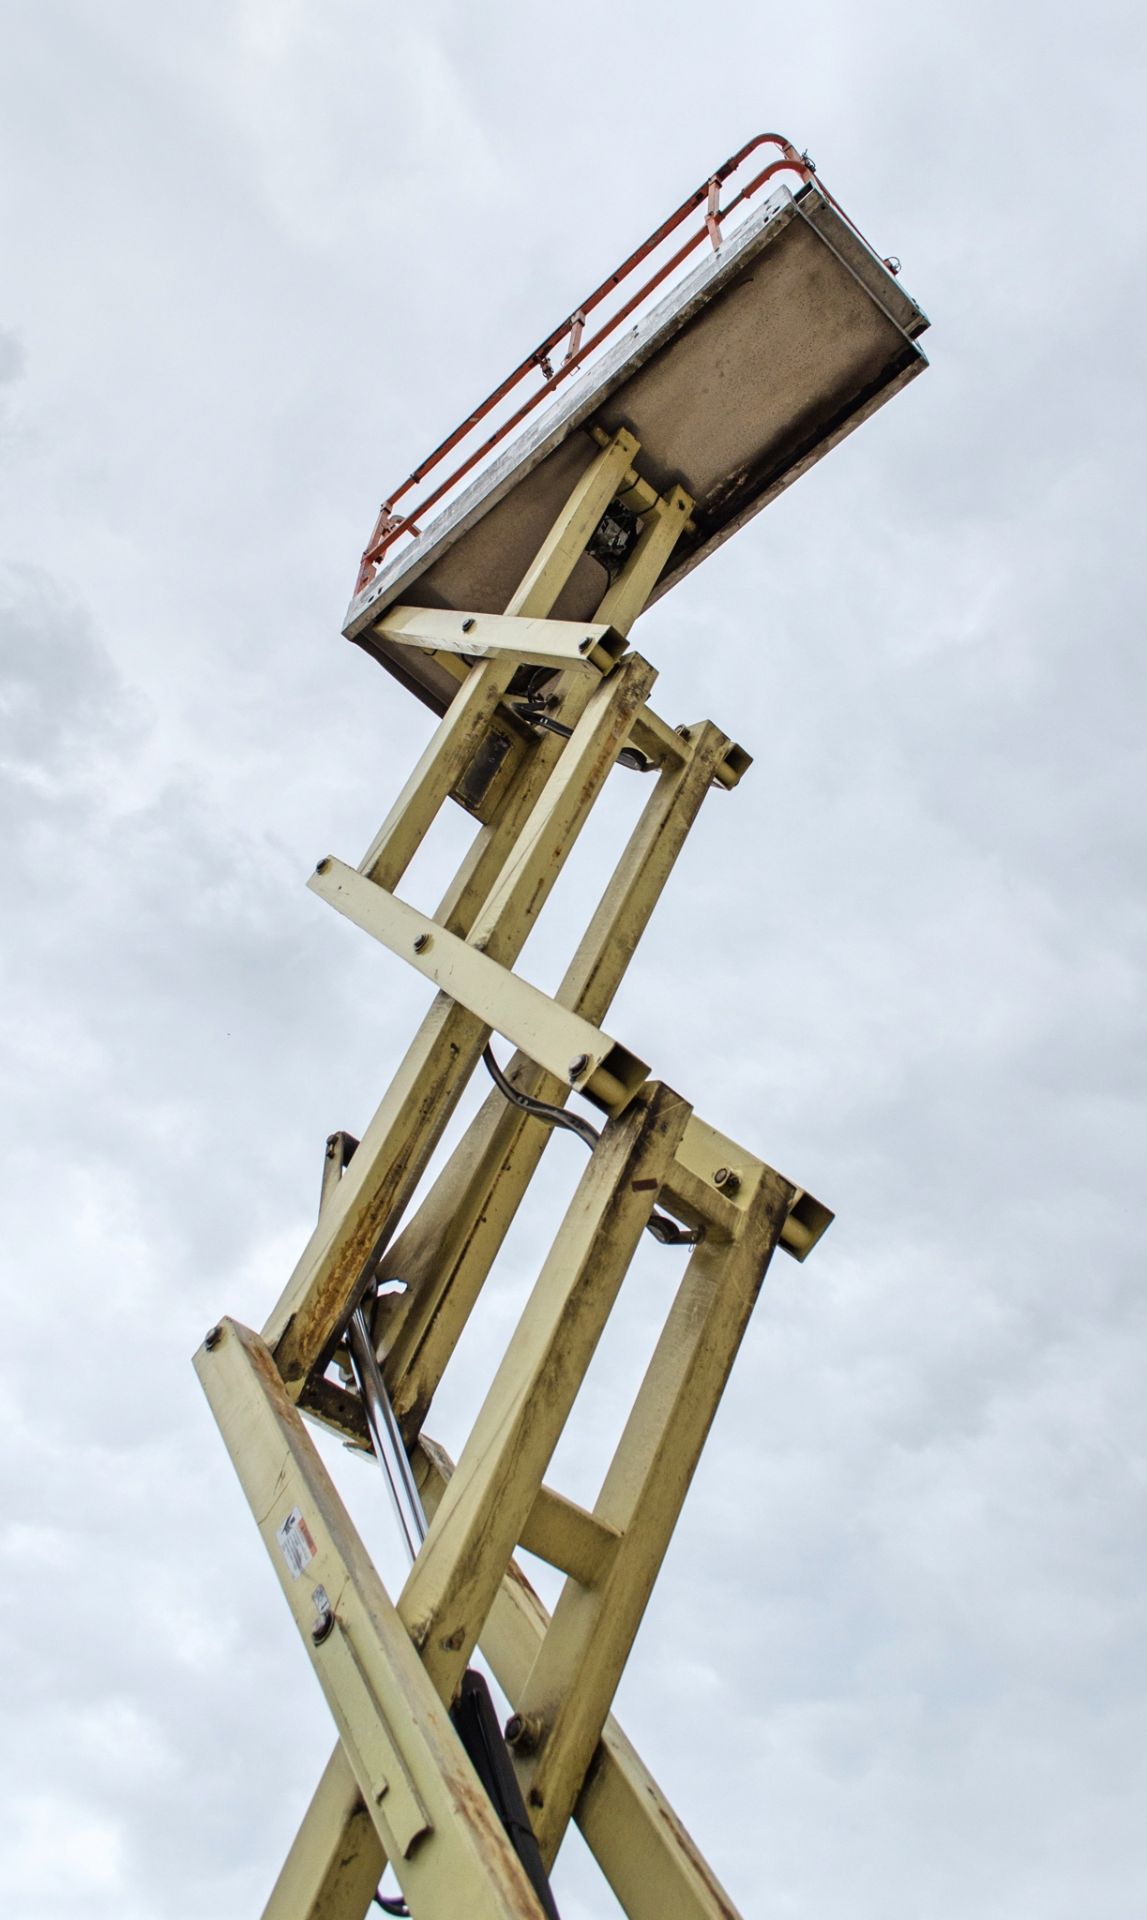 JLG 2630 ES battery electric scissor lift Year: 2006 S/N: 10681 Recorded Hours: 456 HYP066 - Image 6 of 10